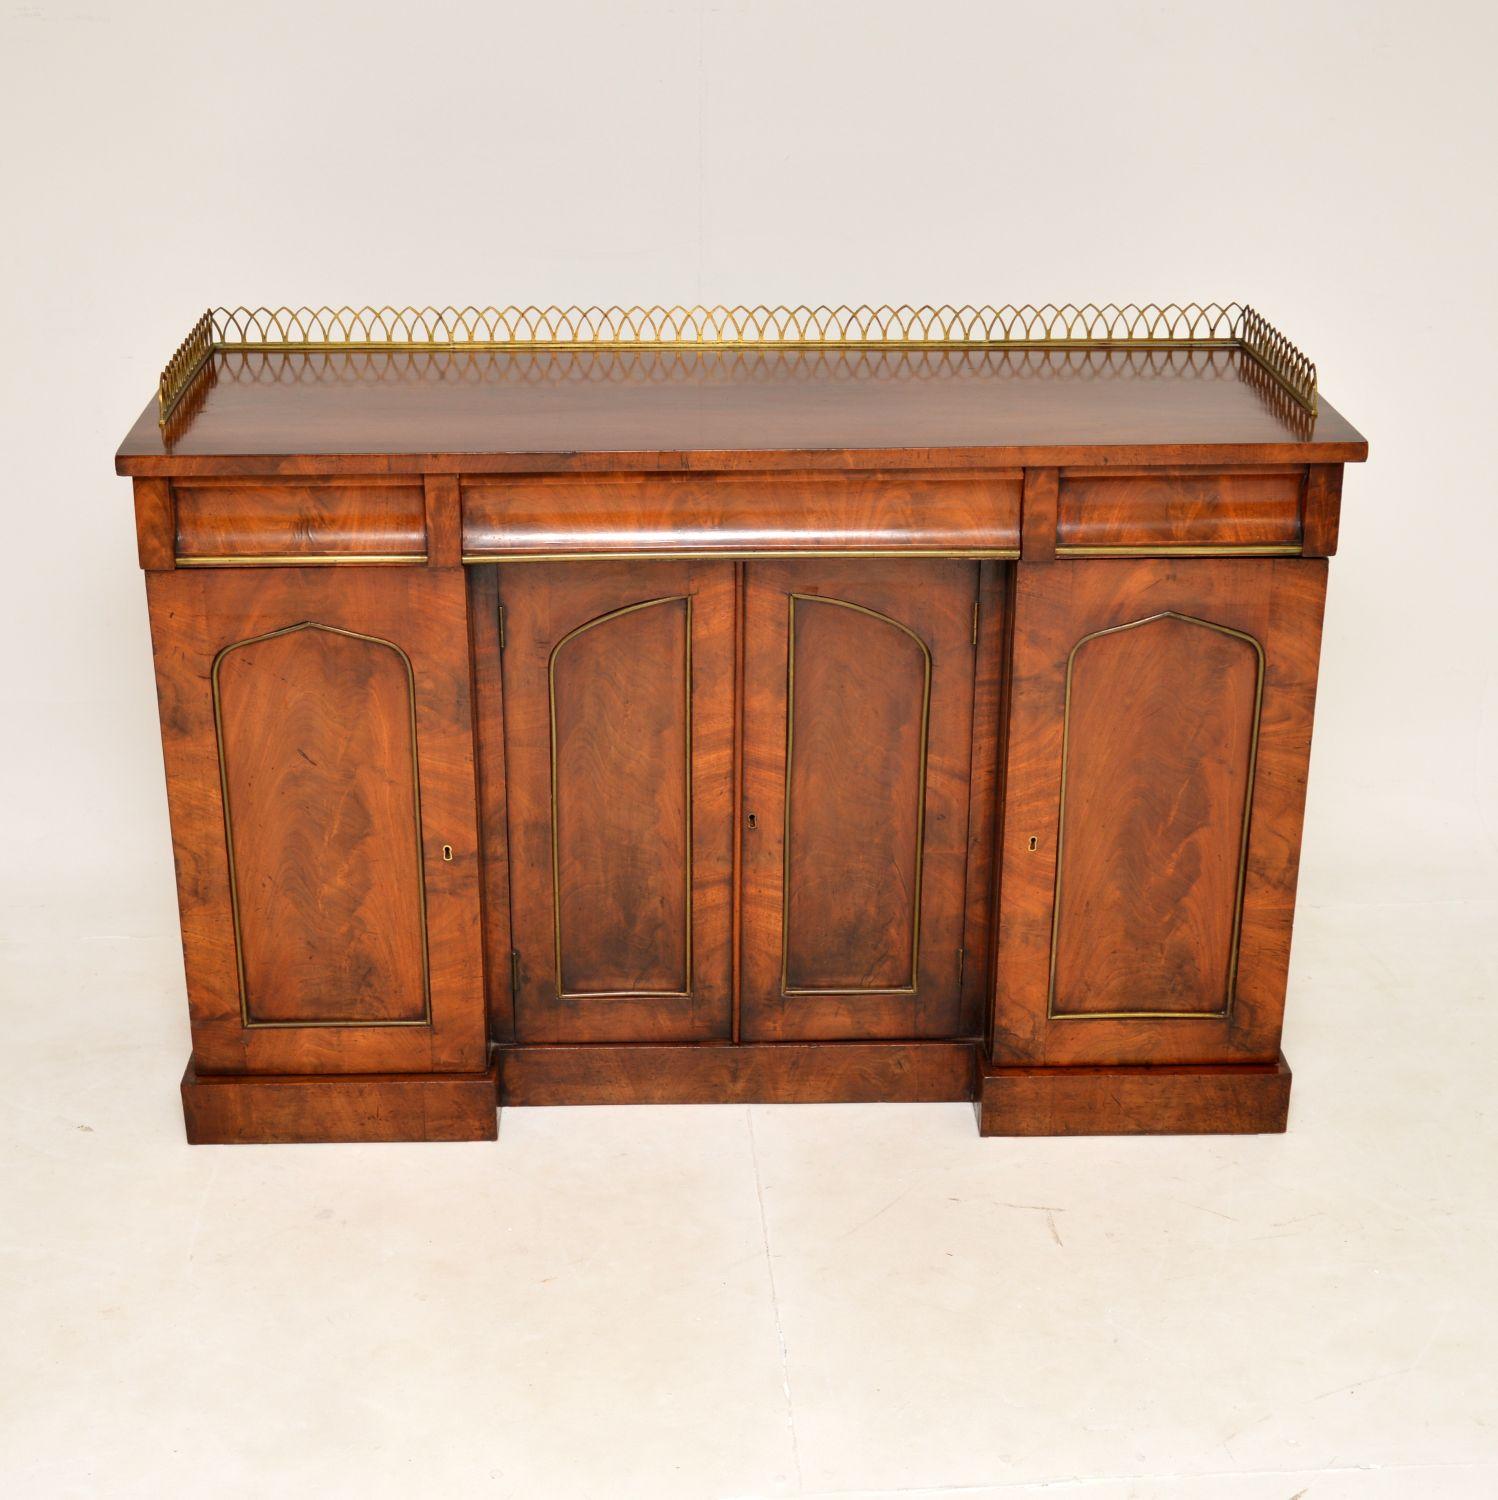 A beautiful original antique early Victorian sideboard in wood with brass adornments. This was made in England, it dates from around the 1830-1840 period.

It is very well made and is a useful size, with lots of storage space. There are three